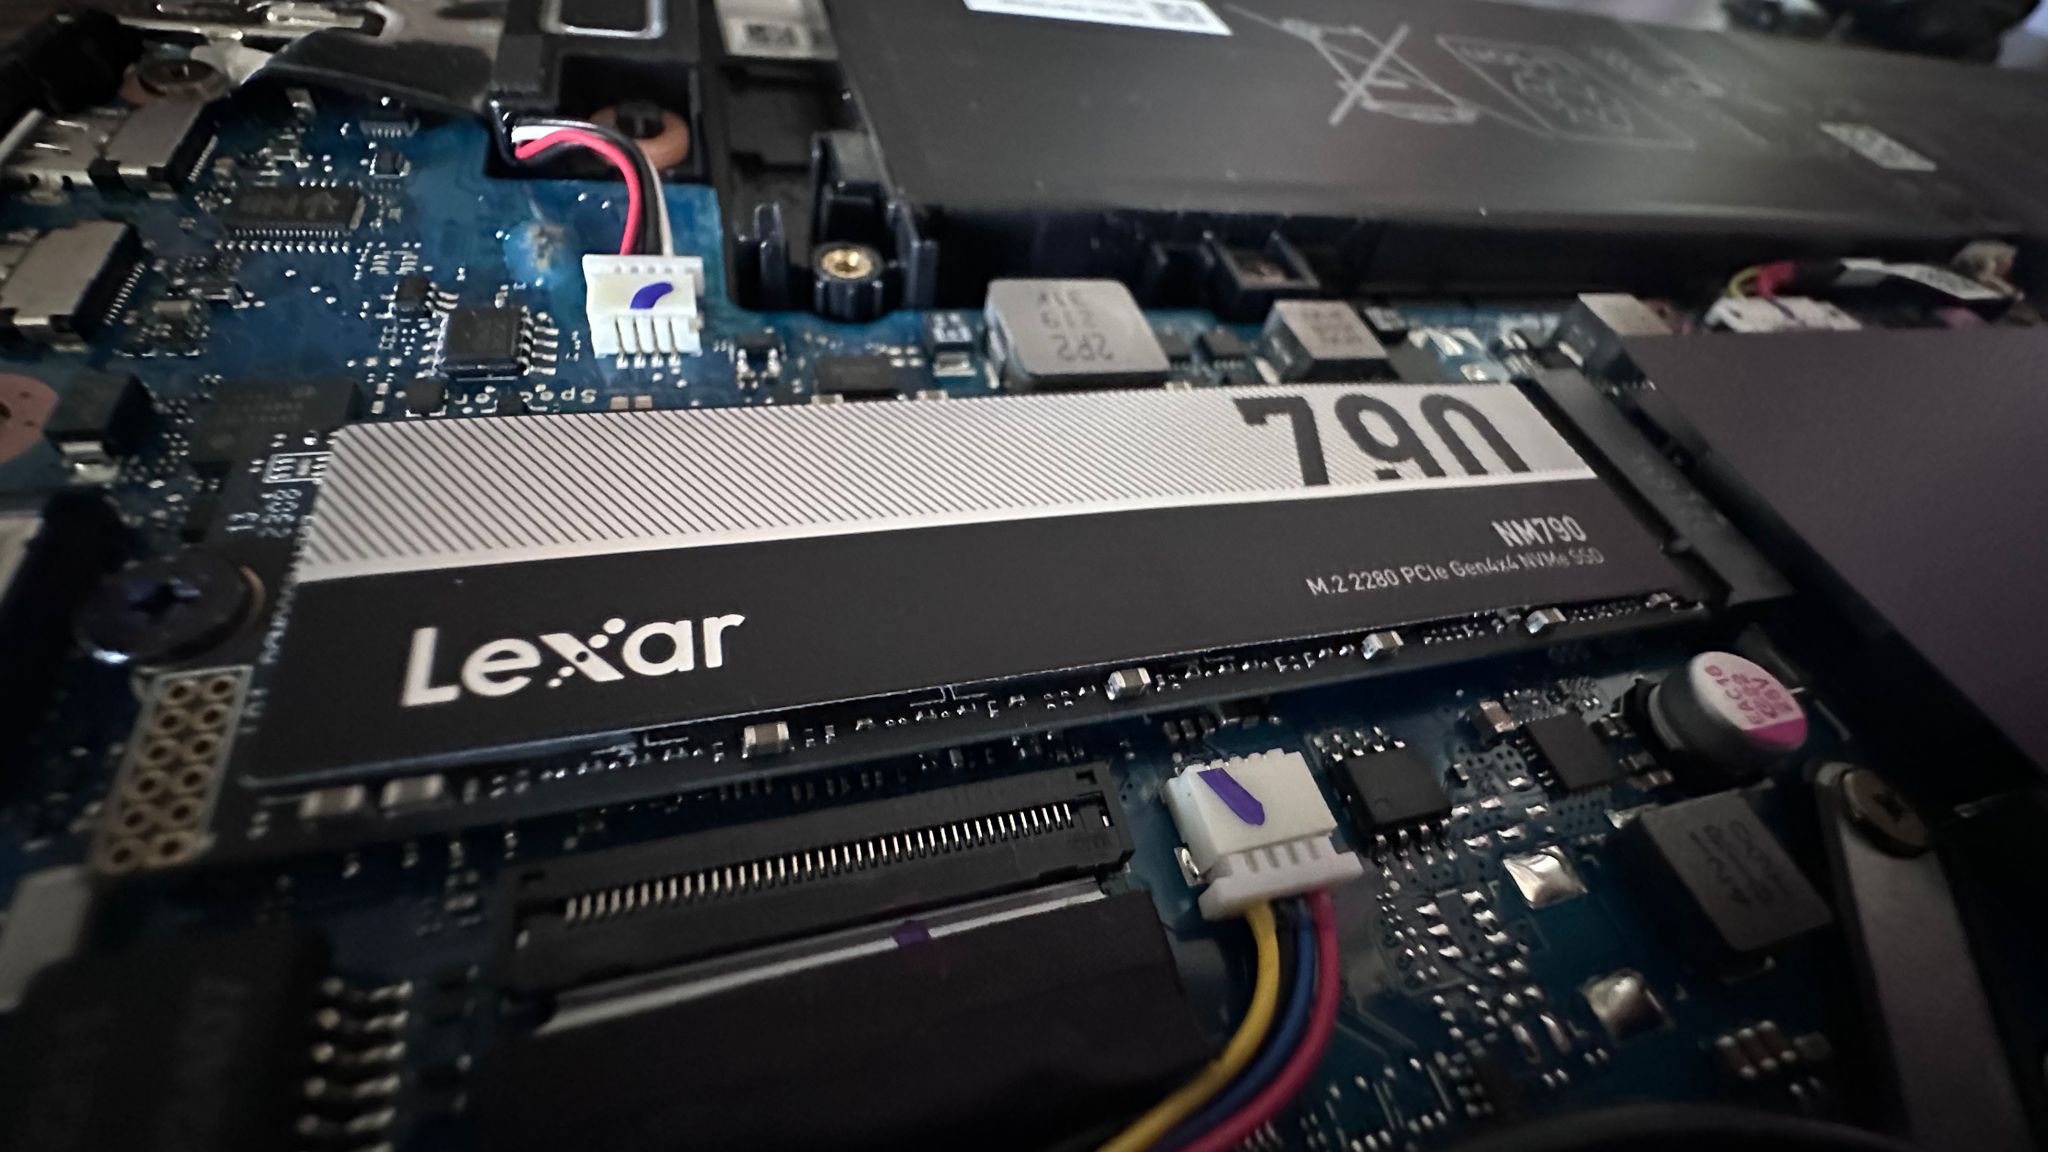 Lexar NM790 SSD Review: Excellent and Affordable - Tech Advisor